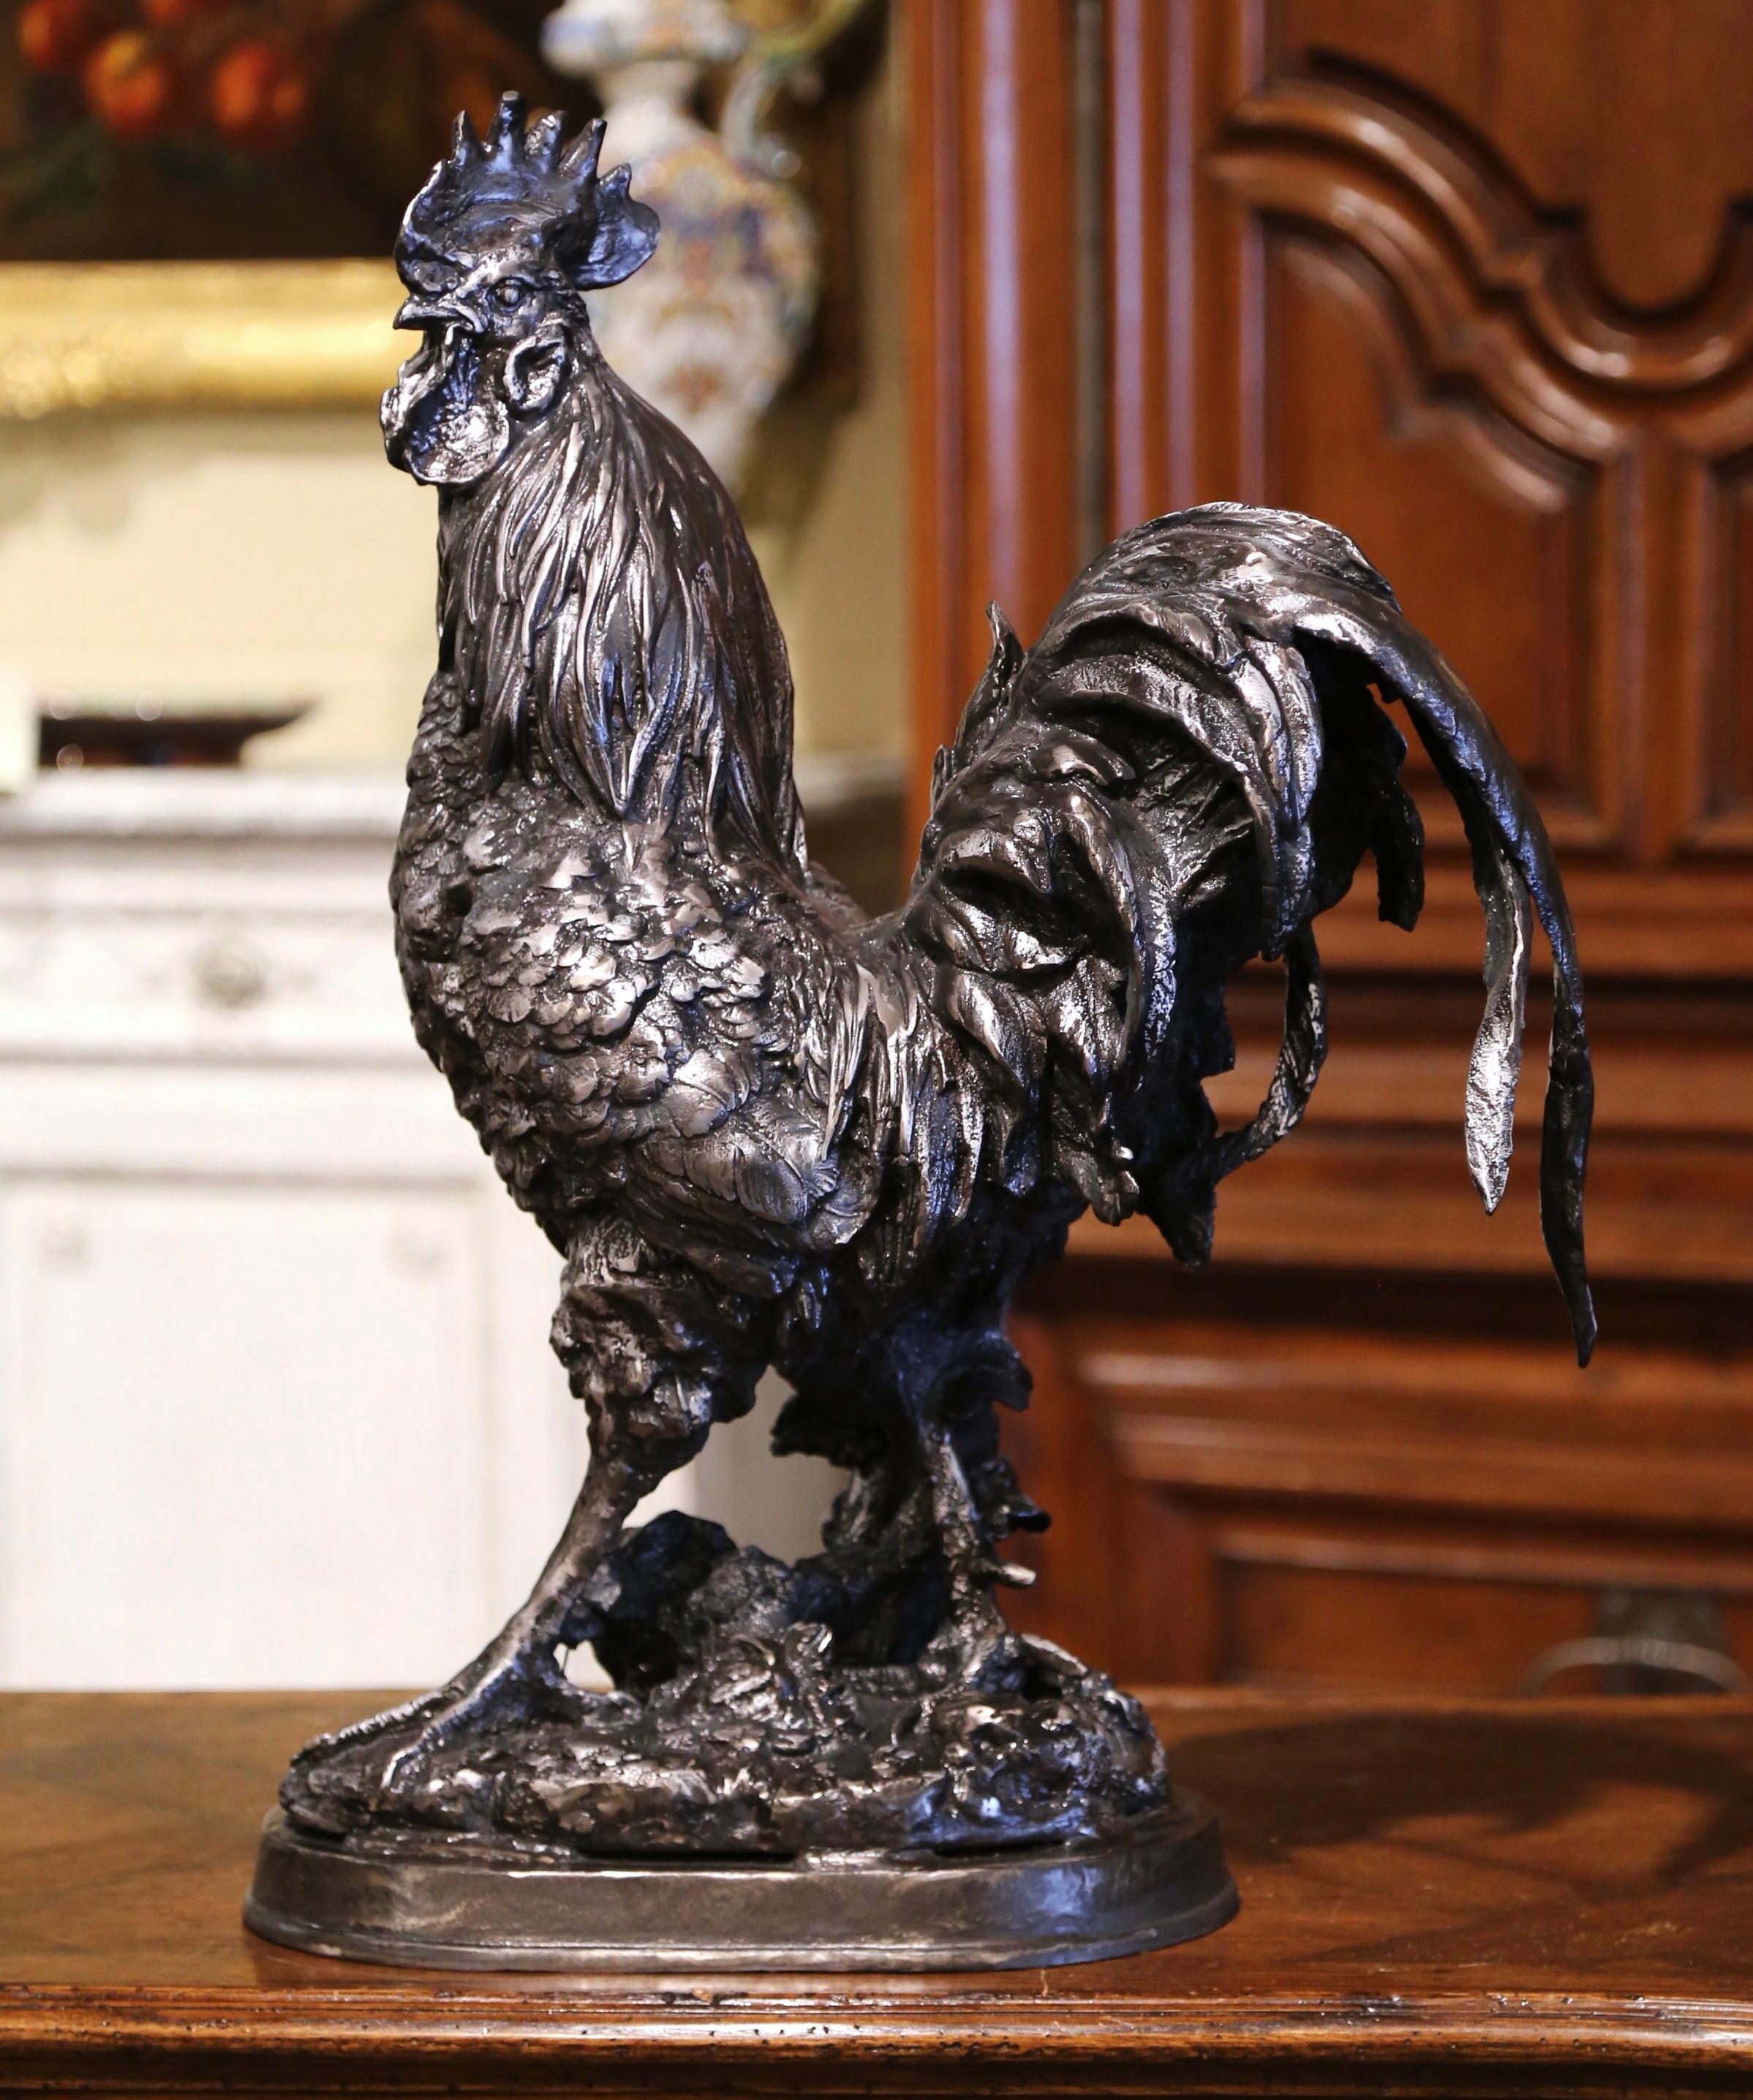 Decorate a kitchen counter with this important antique rooster. Crafted in France circa 1920 and made of solid iron, the sculpture stands on a rocky base and features wonderful details including the plumage. The elegant bird, symbol of France, is in